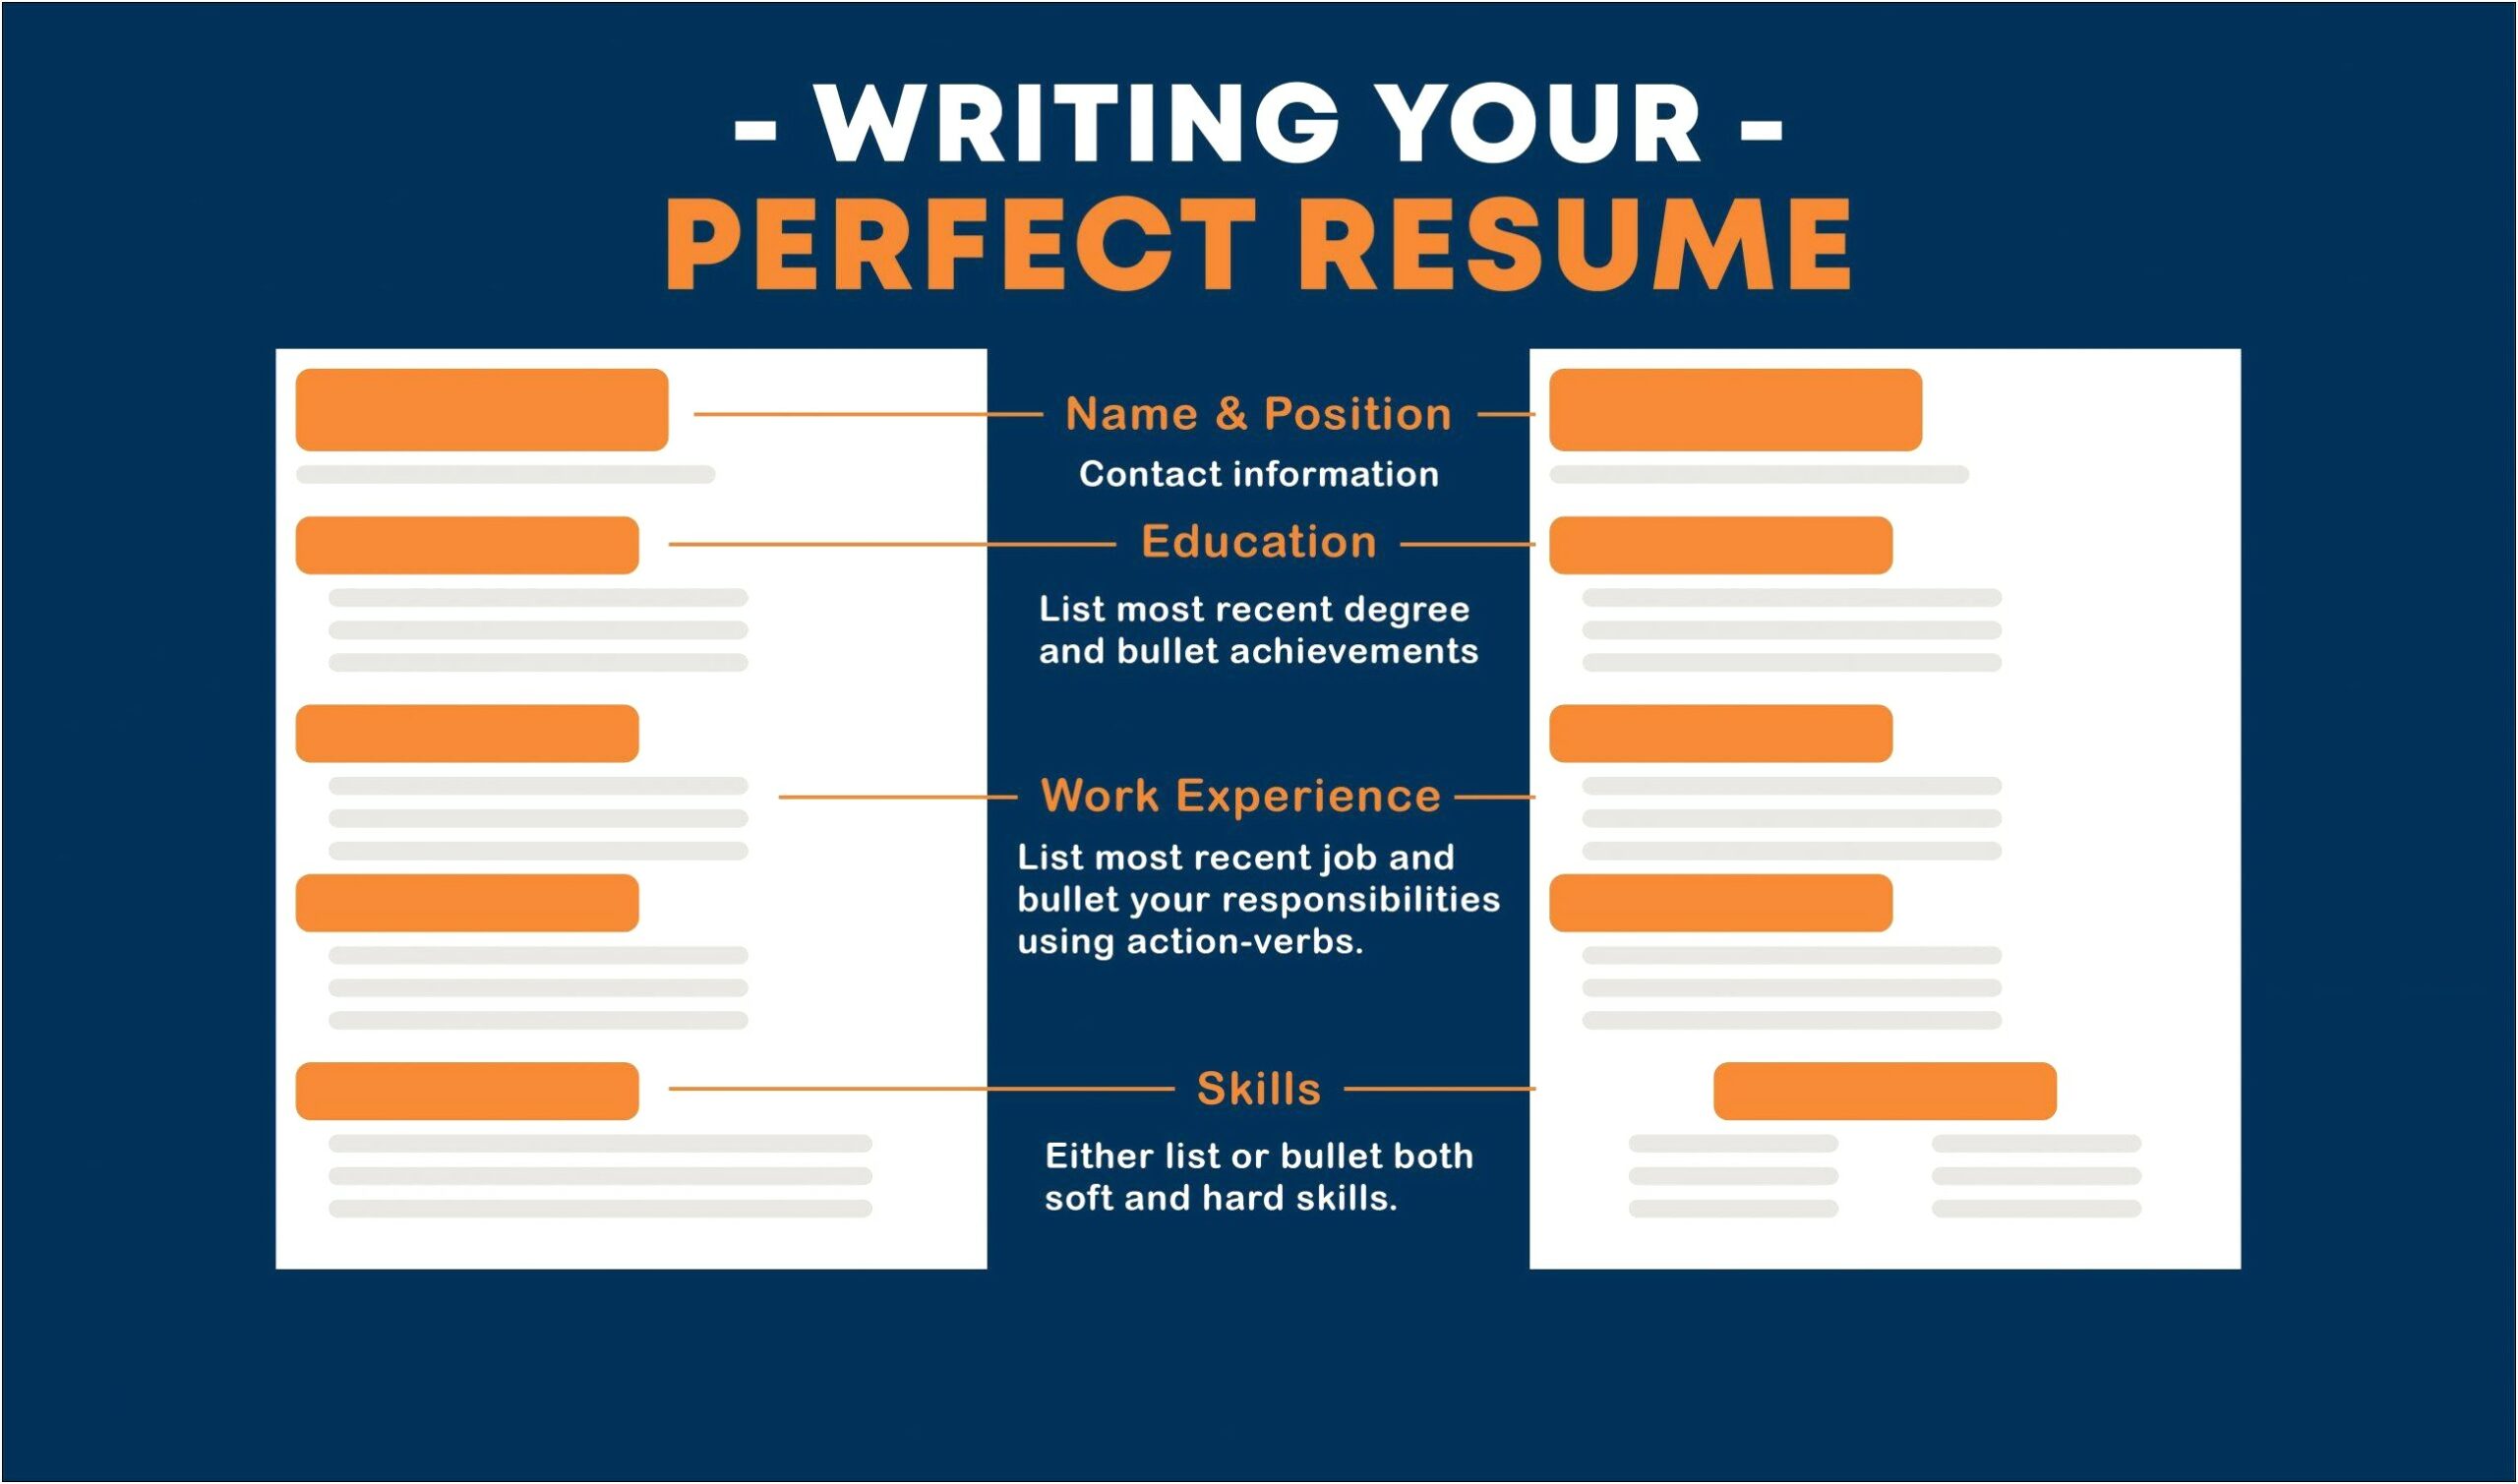 Writing Your Skills On A Resume